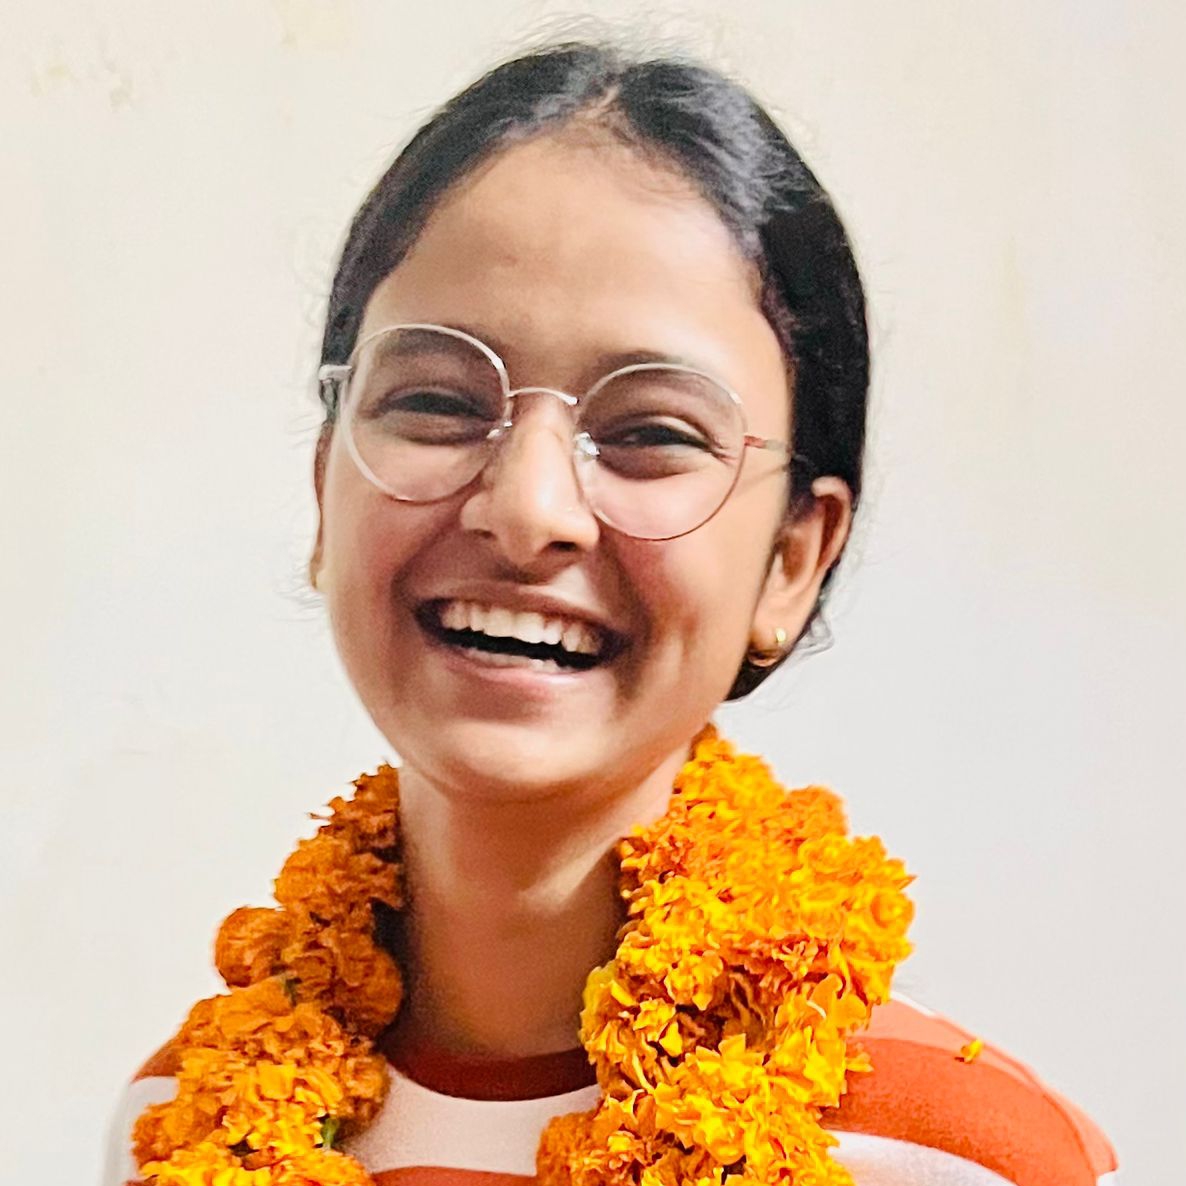 nidhi-rajpurohit-will-be-the-candidate-for-the-post-of-senior-vice-president-of-abvp